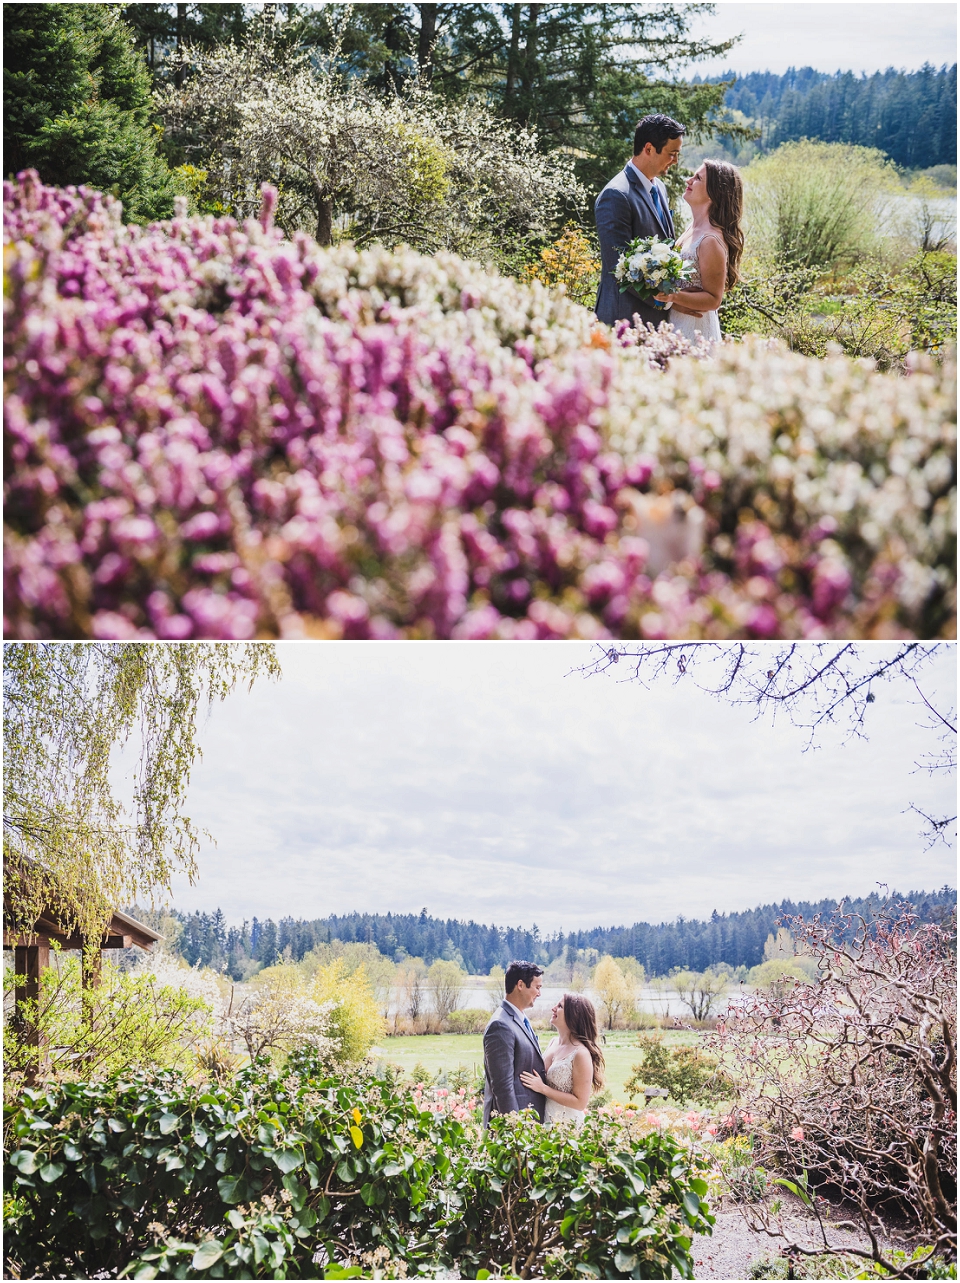 Wedding Photography at the Horticultural Centre of the Pacific